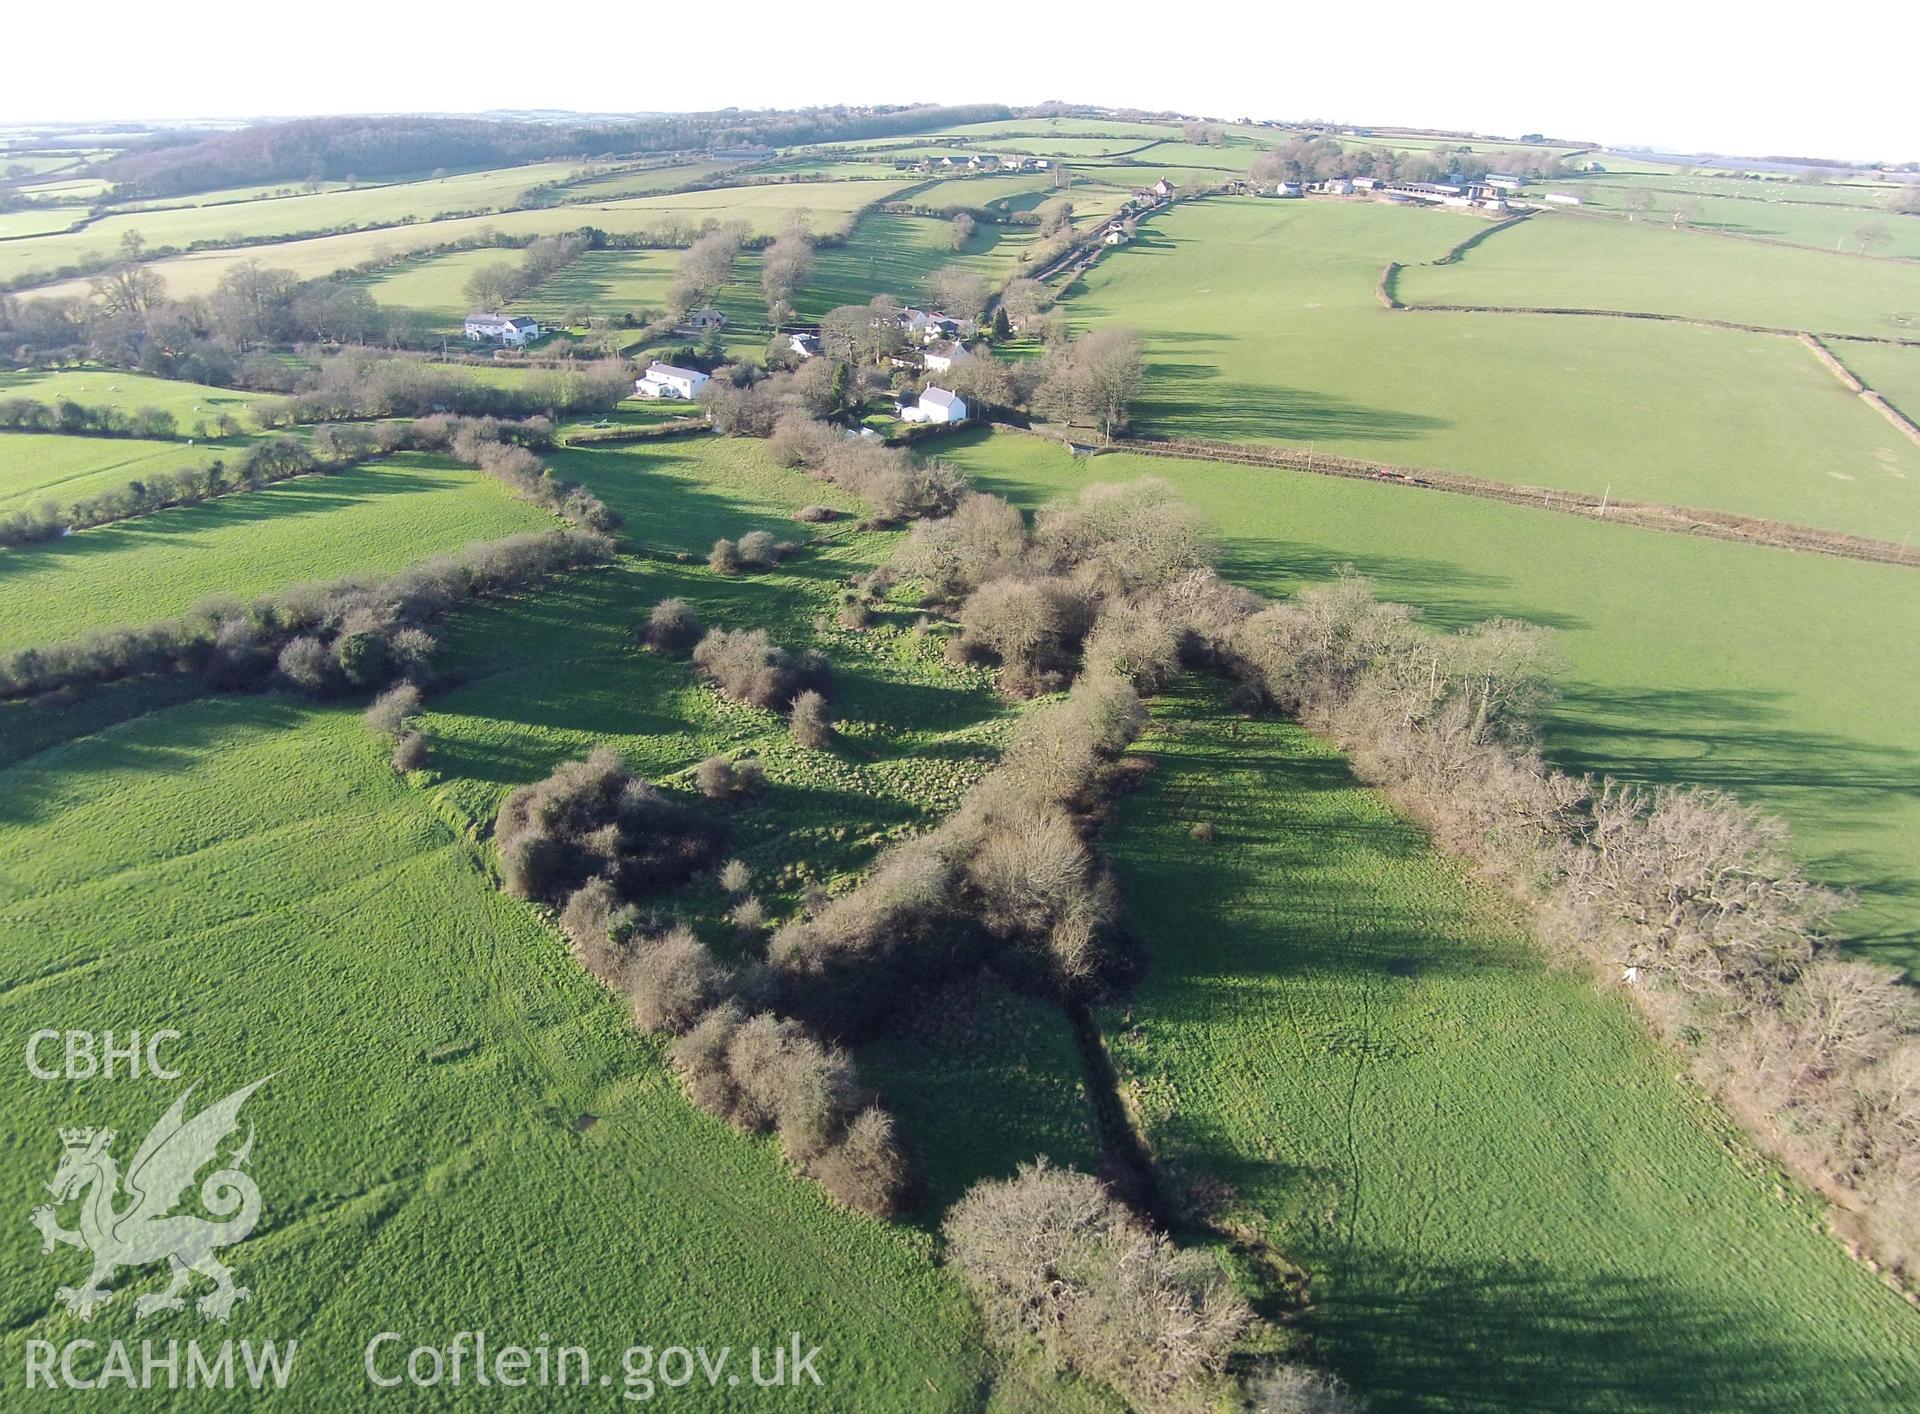 Colour aerial photo showing Horseland Moat, taken by Paul R. Davis, 14th January 2016.